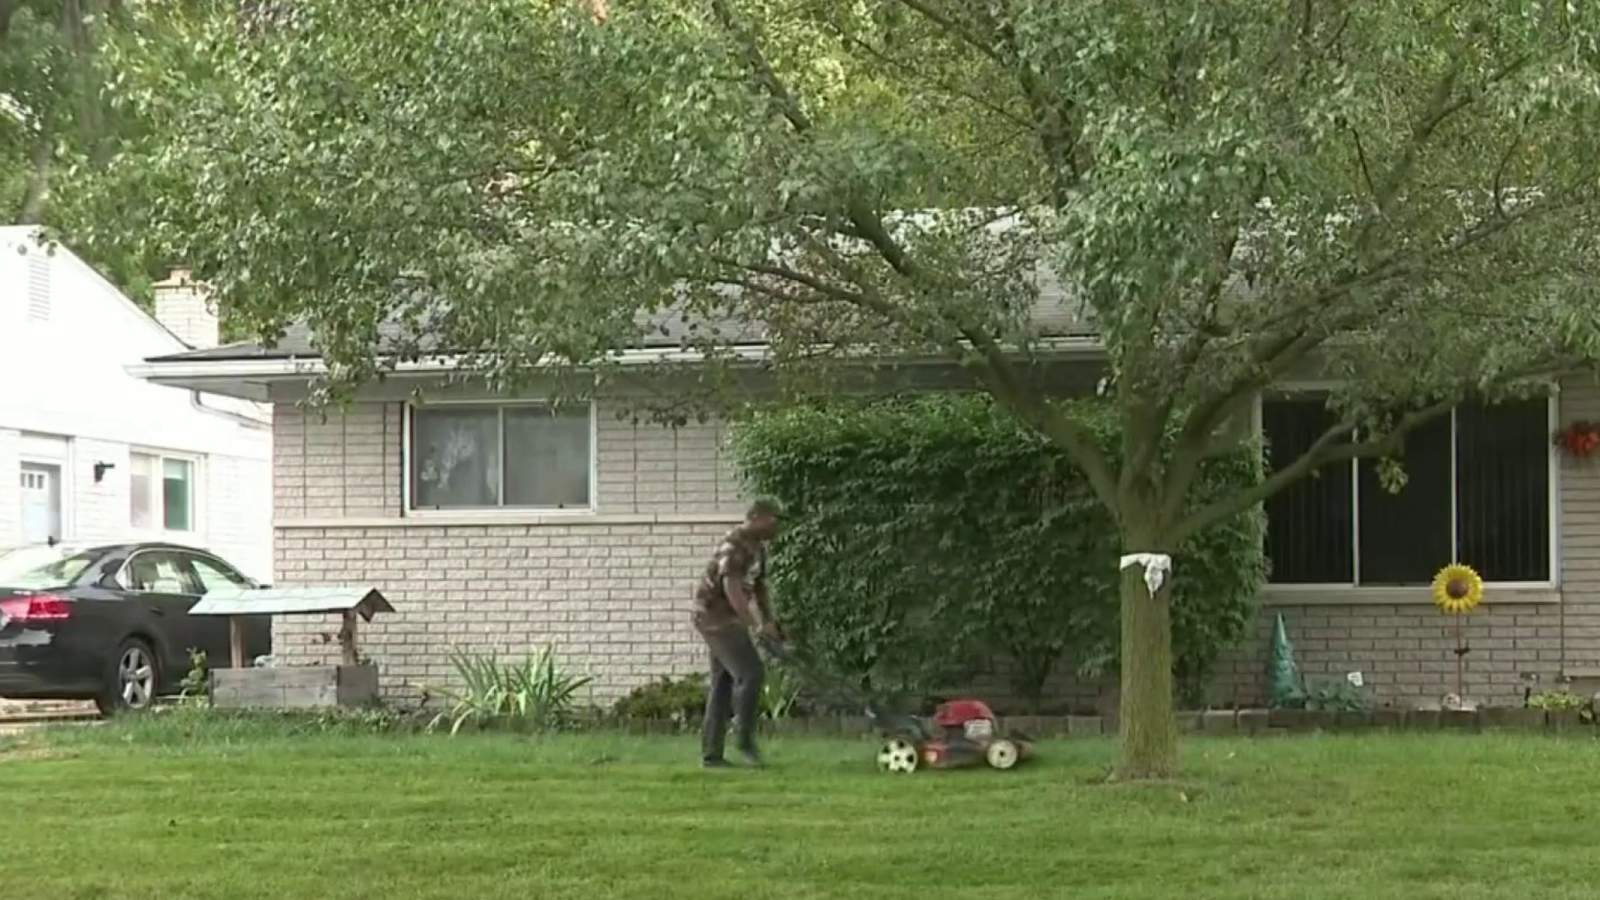 Man traveling the U.S. mowing veterans' lawns stops in Canton, gets a surprise from Ford